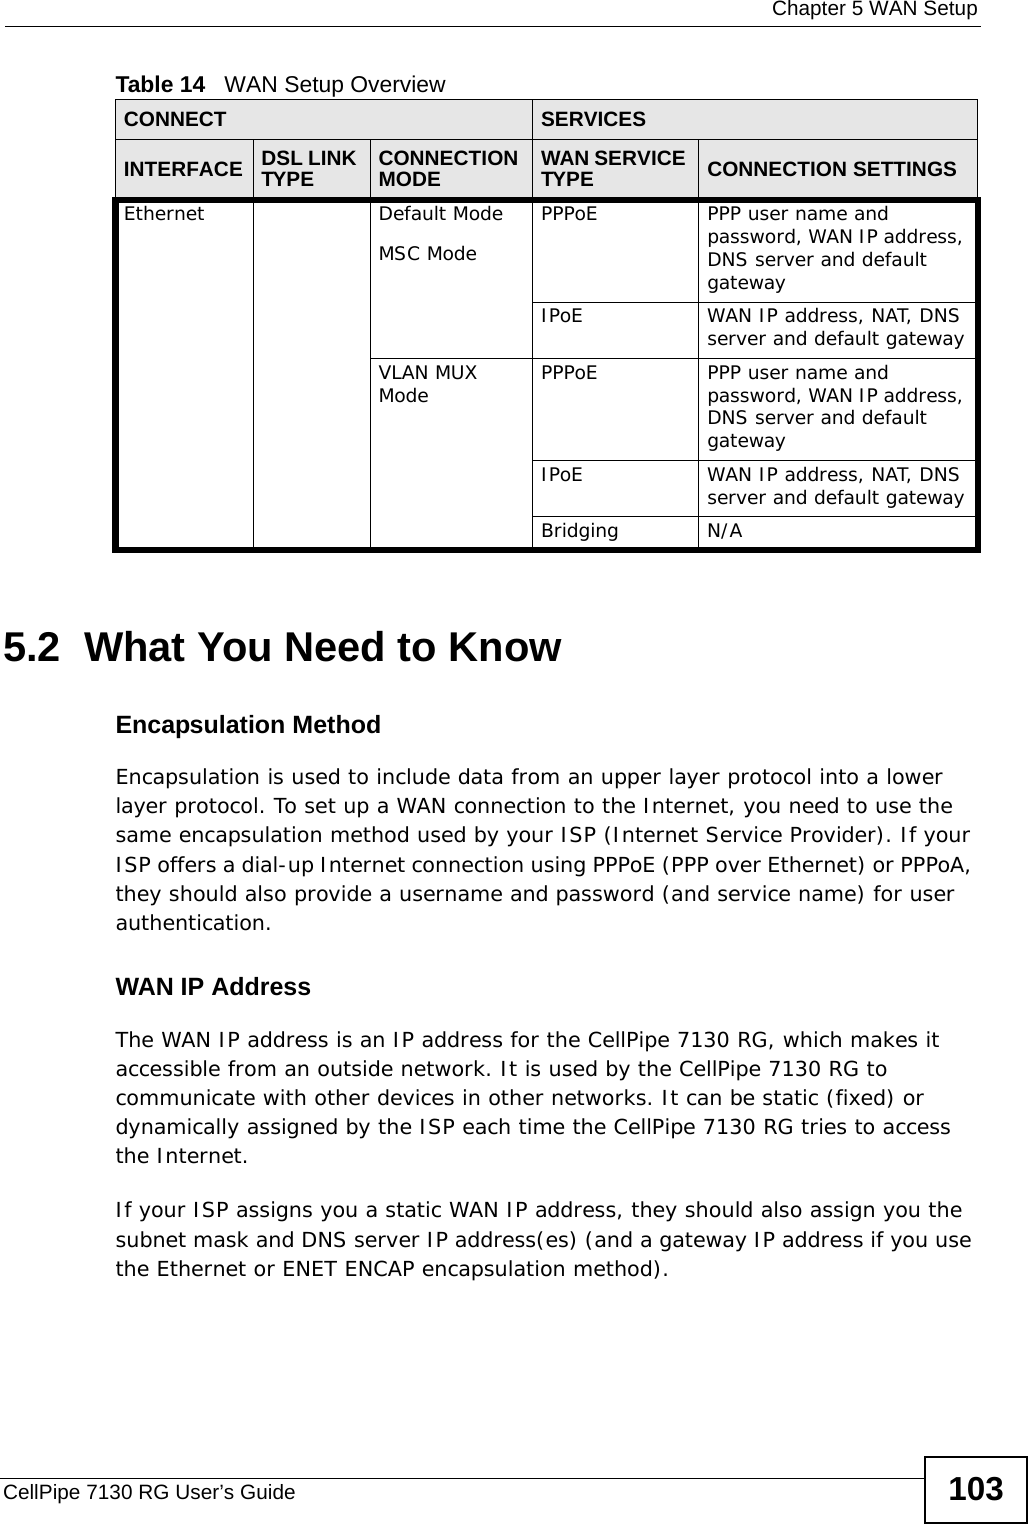  Chapter 5 WAN SetupCellPipe 7130 RG User’s Guide 1035.2  What You Need to KnowEncapsulation MethodEncapsulation is used to include data from an upper layer protocol into a lower layer protocol. To set up a WAN connection to the Internet, you need to use the same encapsulation method used by your ISP (Internet Service Provider). If your ISP offers a dial-up Internet connection using PPPoE (PPP over Ethernet) or PPPoA, they should also provide a username and password (and service name) for user authentication.WAN IP AddressThe WAN IP address is an IP address for the CellPipe 7130 RG, which makes it accessible from an outside network. It is used by the CellPipe 7130 RG to communicate with other devices in other networks. It can be static (fixed) or dynamically assigned by the ISP each time the CellPipe 7130 RG tries to access the Internet.If your ISP assigns you a static WAN IP address, they should also assign you the subnet mask and DNS server IP address(es) (and a gateway IP address if you use the Ethernet or ENET ENCAP encapsulation method).Ethernet Default ModeMSC ModePPPoE PPP user name and password, WAN IP address, DNS server and default gatewayIPoE WAN IP address, NAT, DNS server and default gatewayVLAN MUX Mode PPPoE PPP user name and password, WAN IP address, DNS server and default gatewayIPoE WAN IP address, NAT, DNS server and default gatewayBridging N/ATable 14   WAN Setup Overview CONNECT SERVICESINTERFACE DSL LINK TYPE CONNECTION MODE WAN SERVICE TYPE CONNECTION SETTINGS